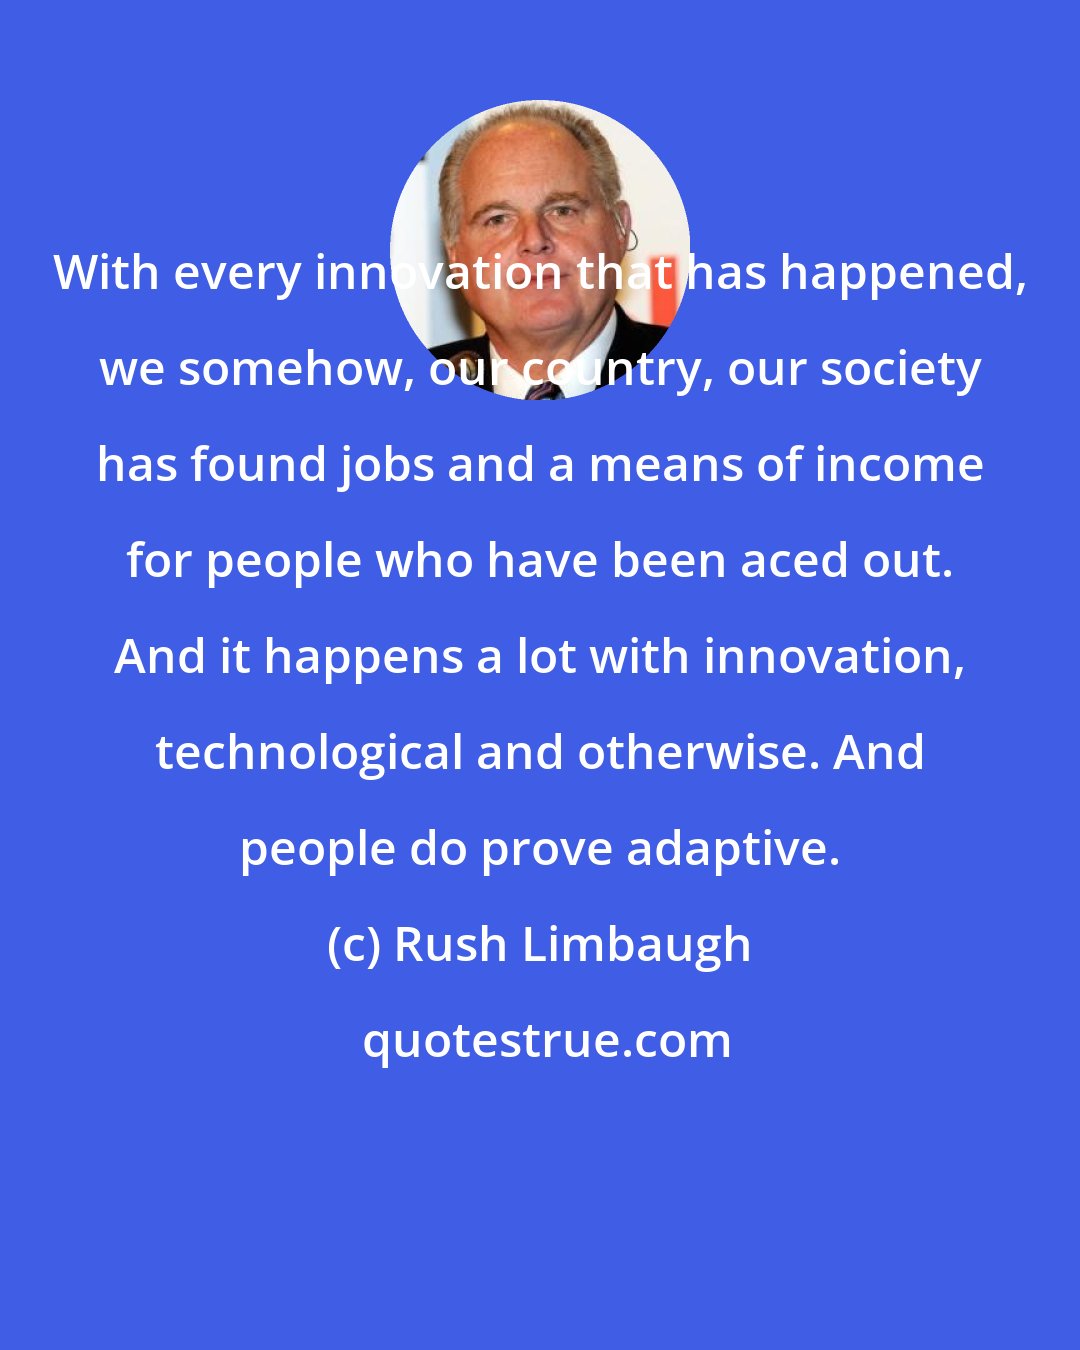 Rush Limbaugh: With every innovation that has happened, we somehow, our country, our society has found jobs and a means of income for people who have been aced out. And it happens a lot with innovation, technological and otherwise. And people do prove adaptive.